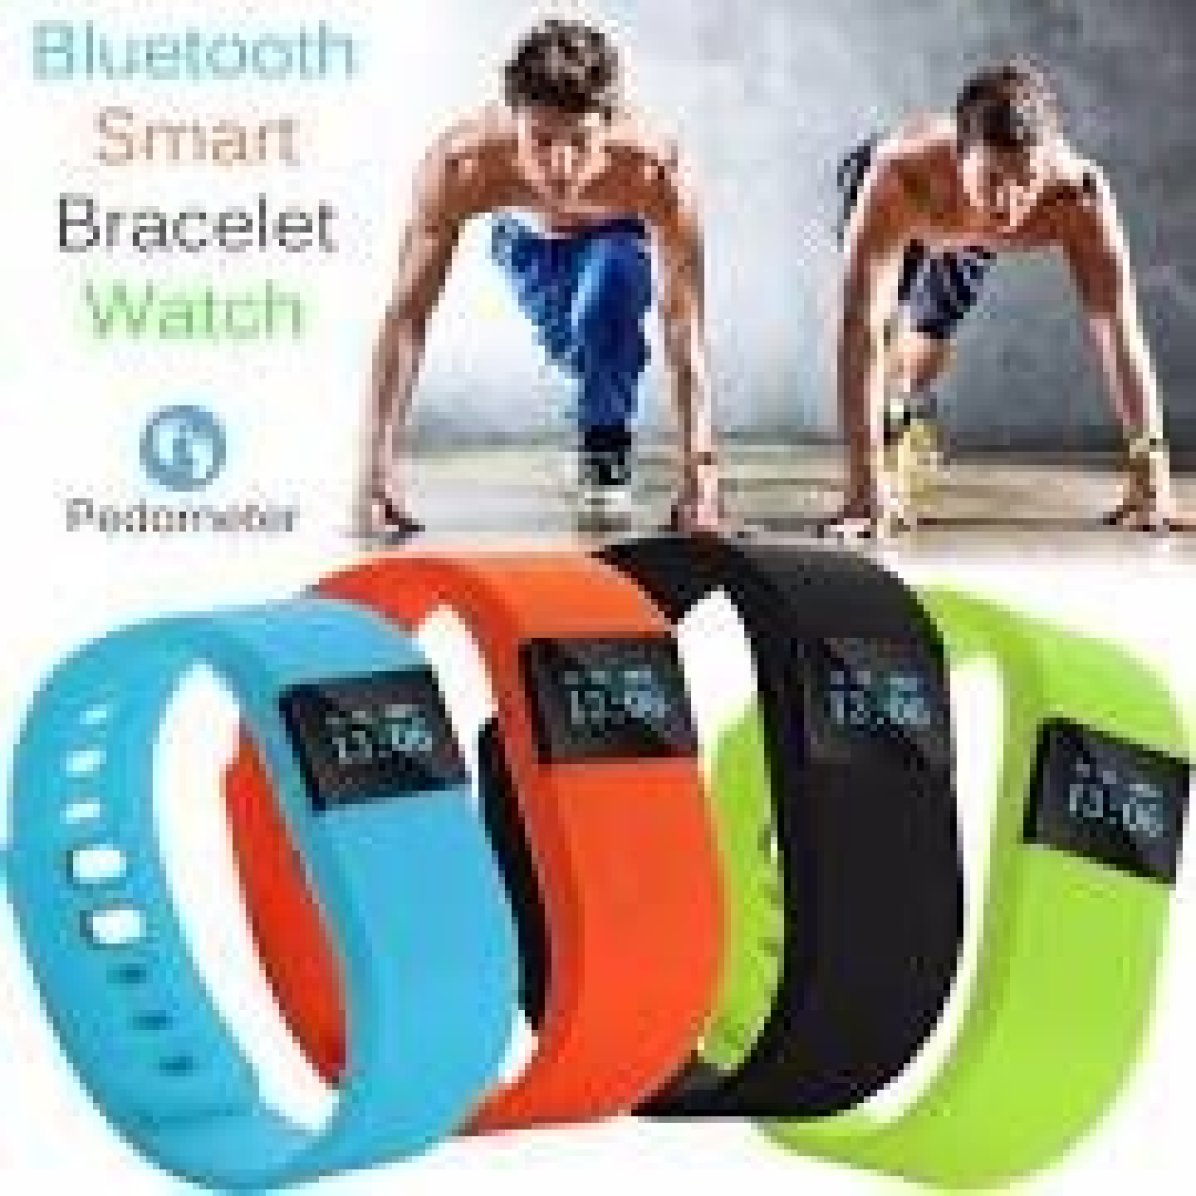 Smart Bluetooth Fitness Watch, Deals on bluetooth watches, Deals on Water Proof exercise watches, Deals on Exercise Watches, Lowest Deals online, Deals to buy, Deals on Fitness products